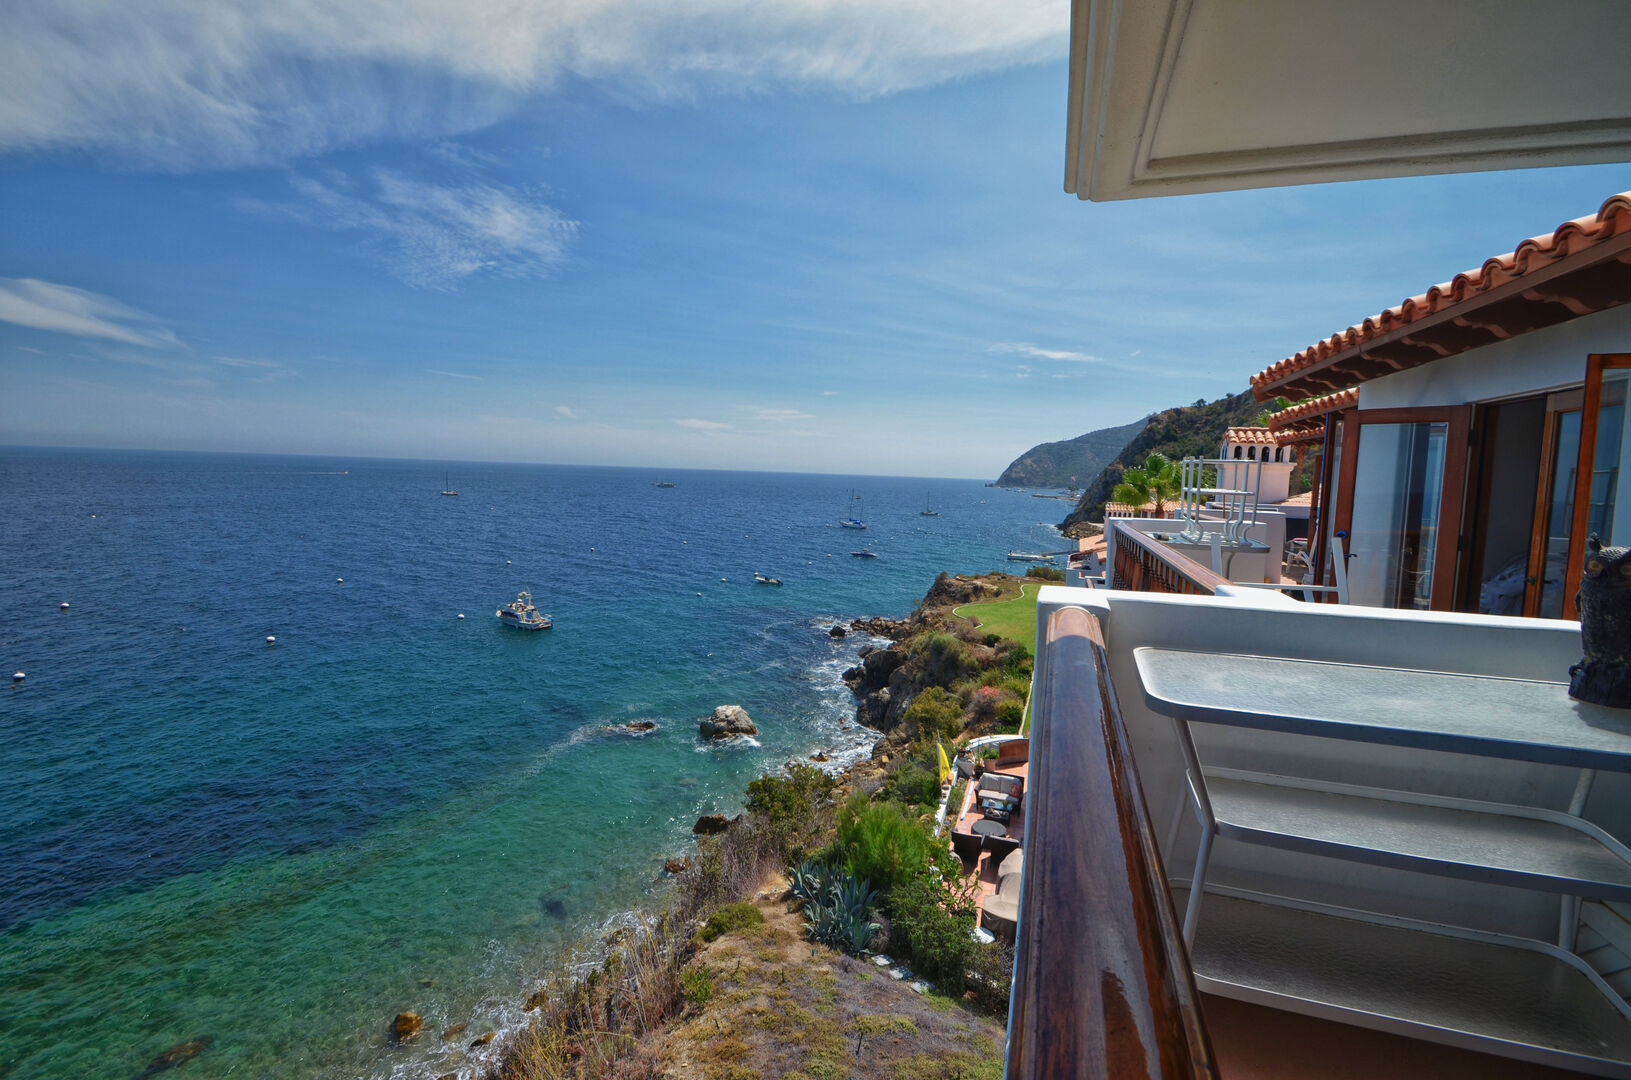 Priceless views from the private balcony